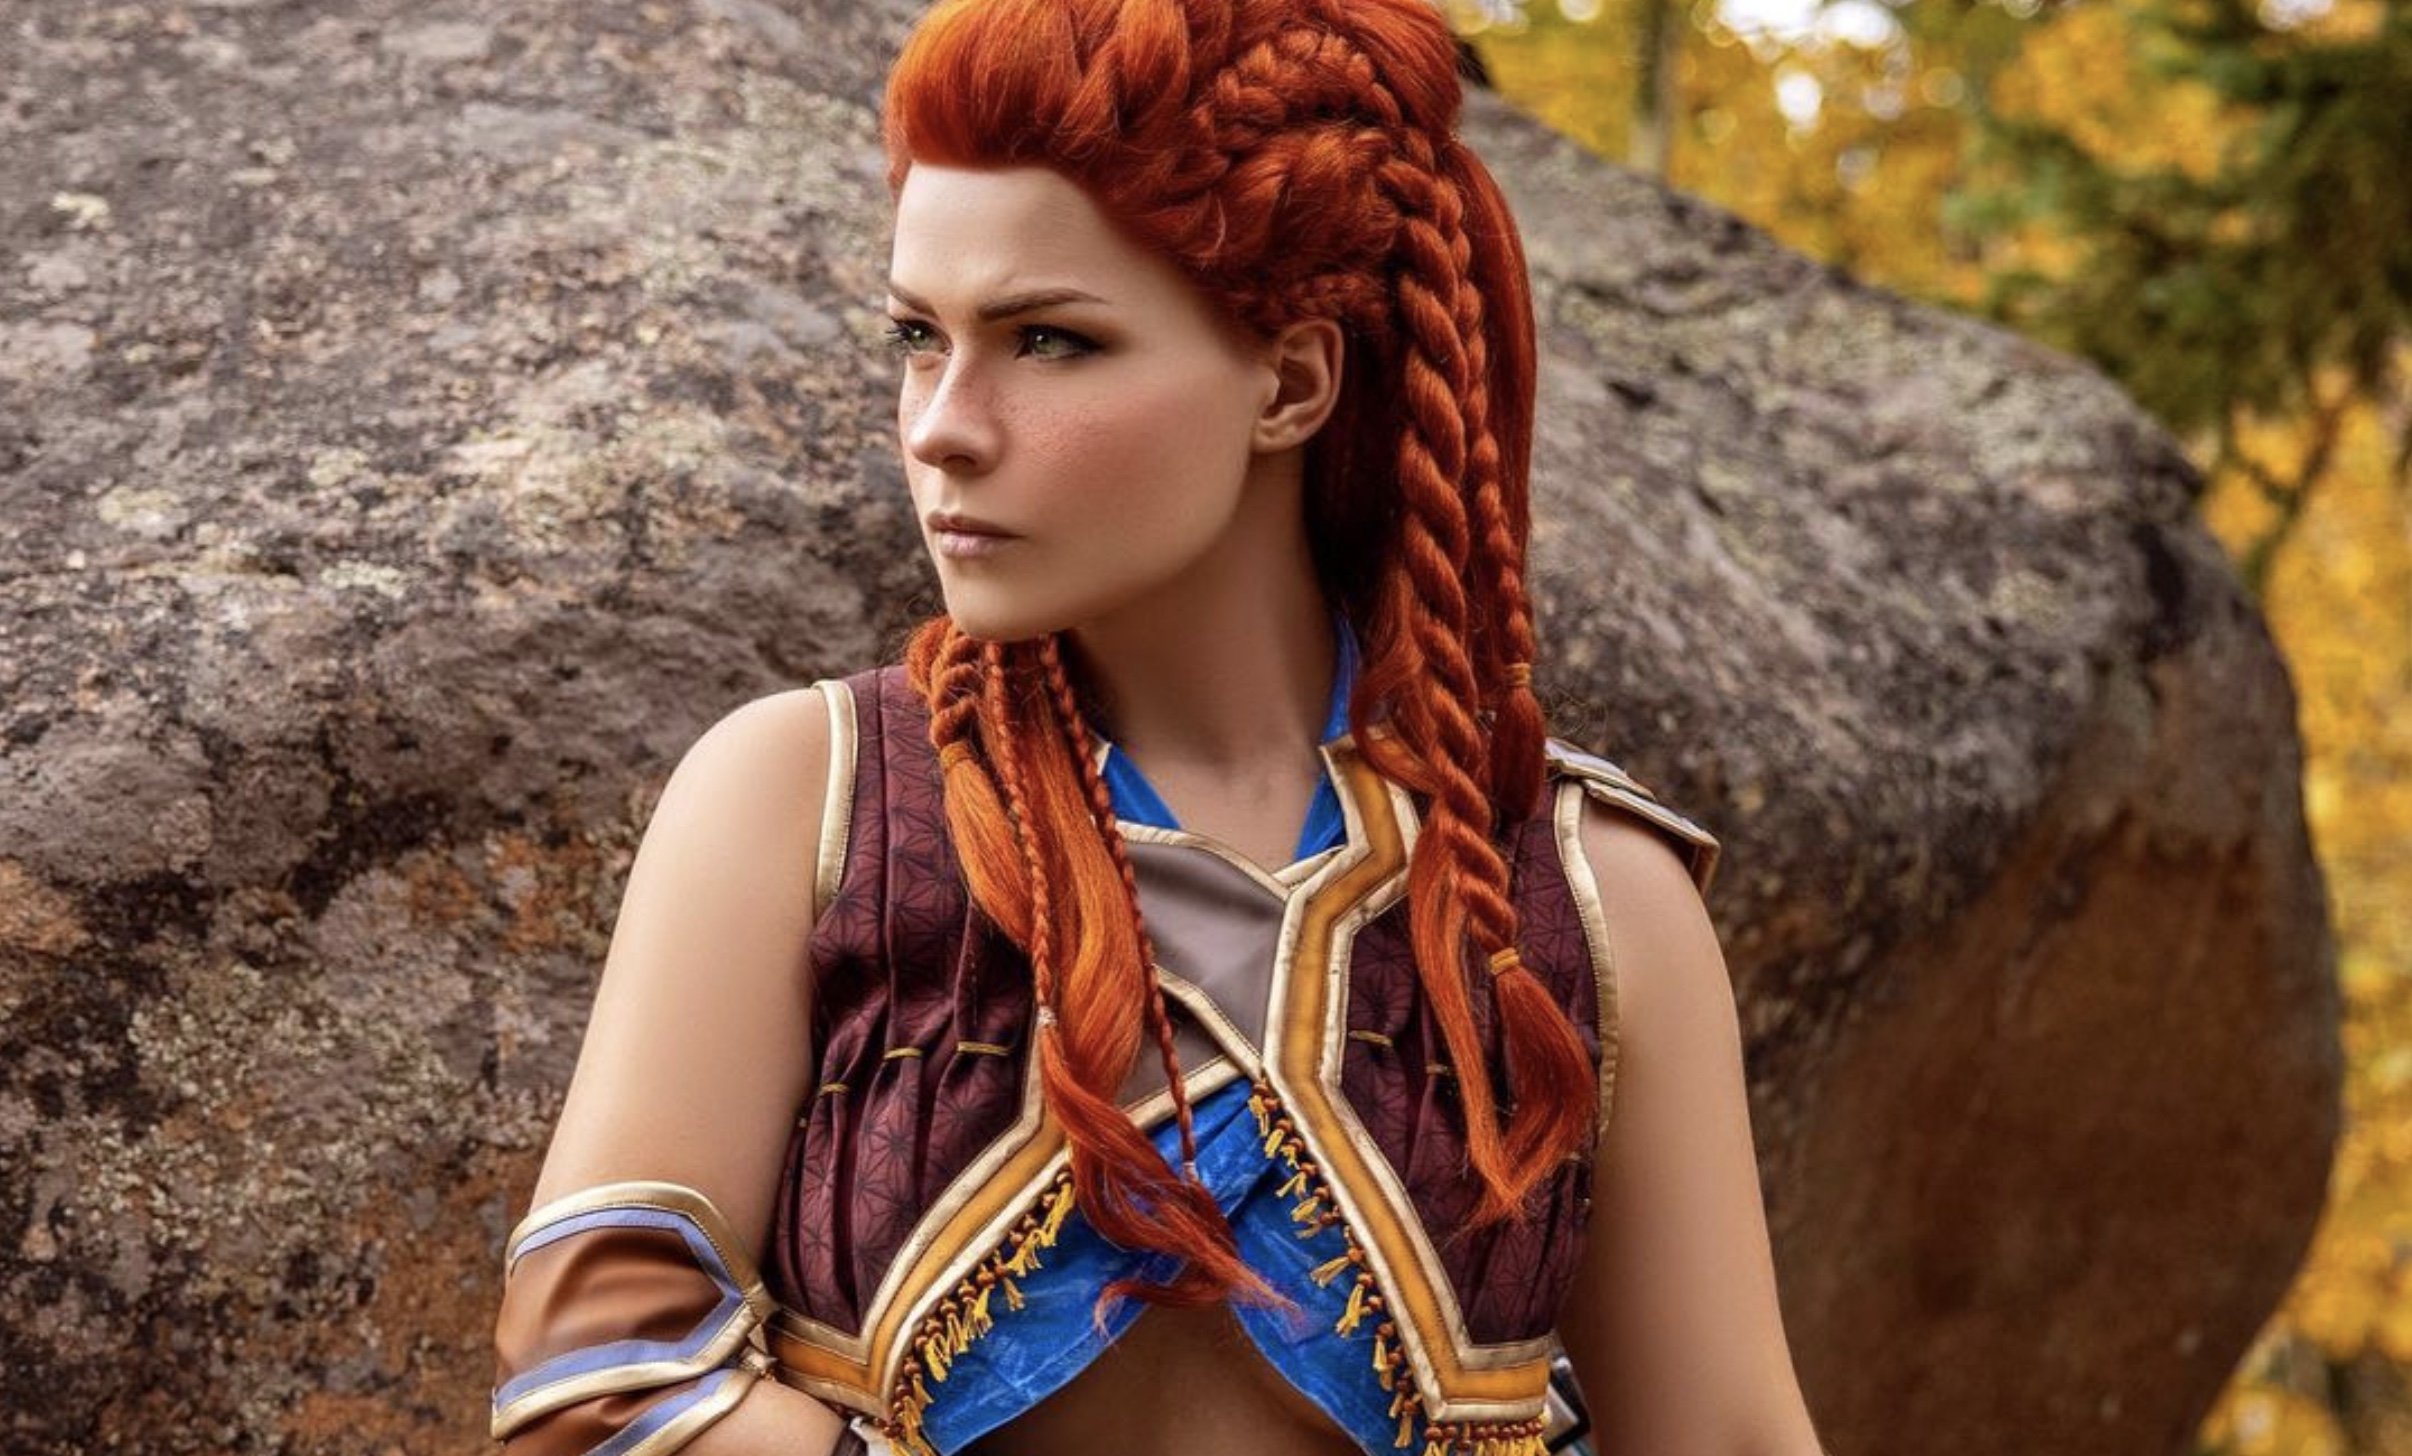 Stunning Cosplay of Aloy From HORIZON ZERO DAWN Created by